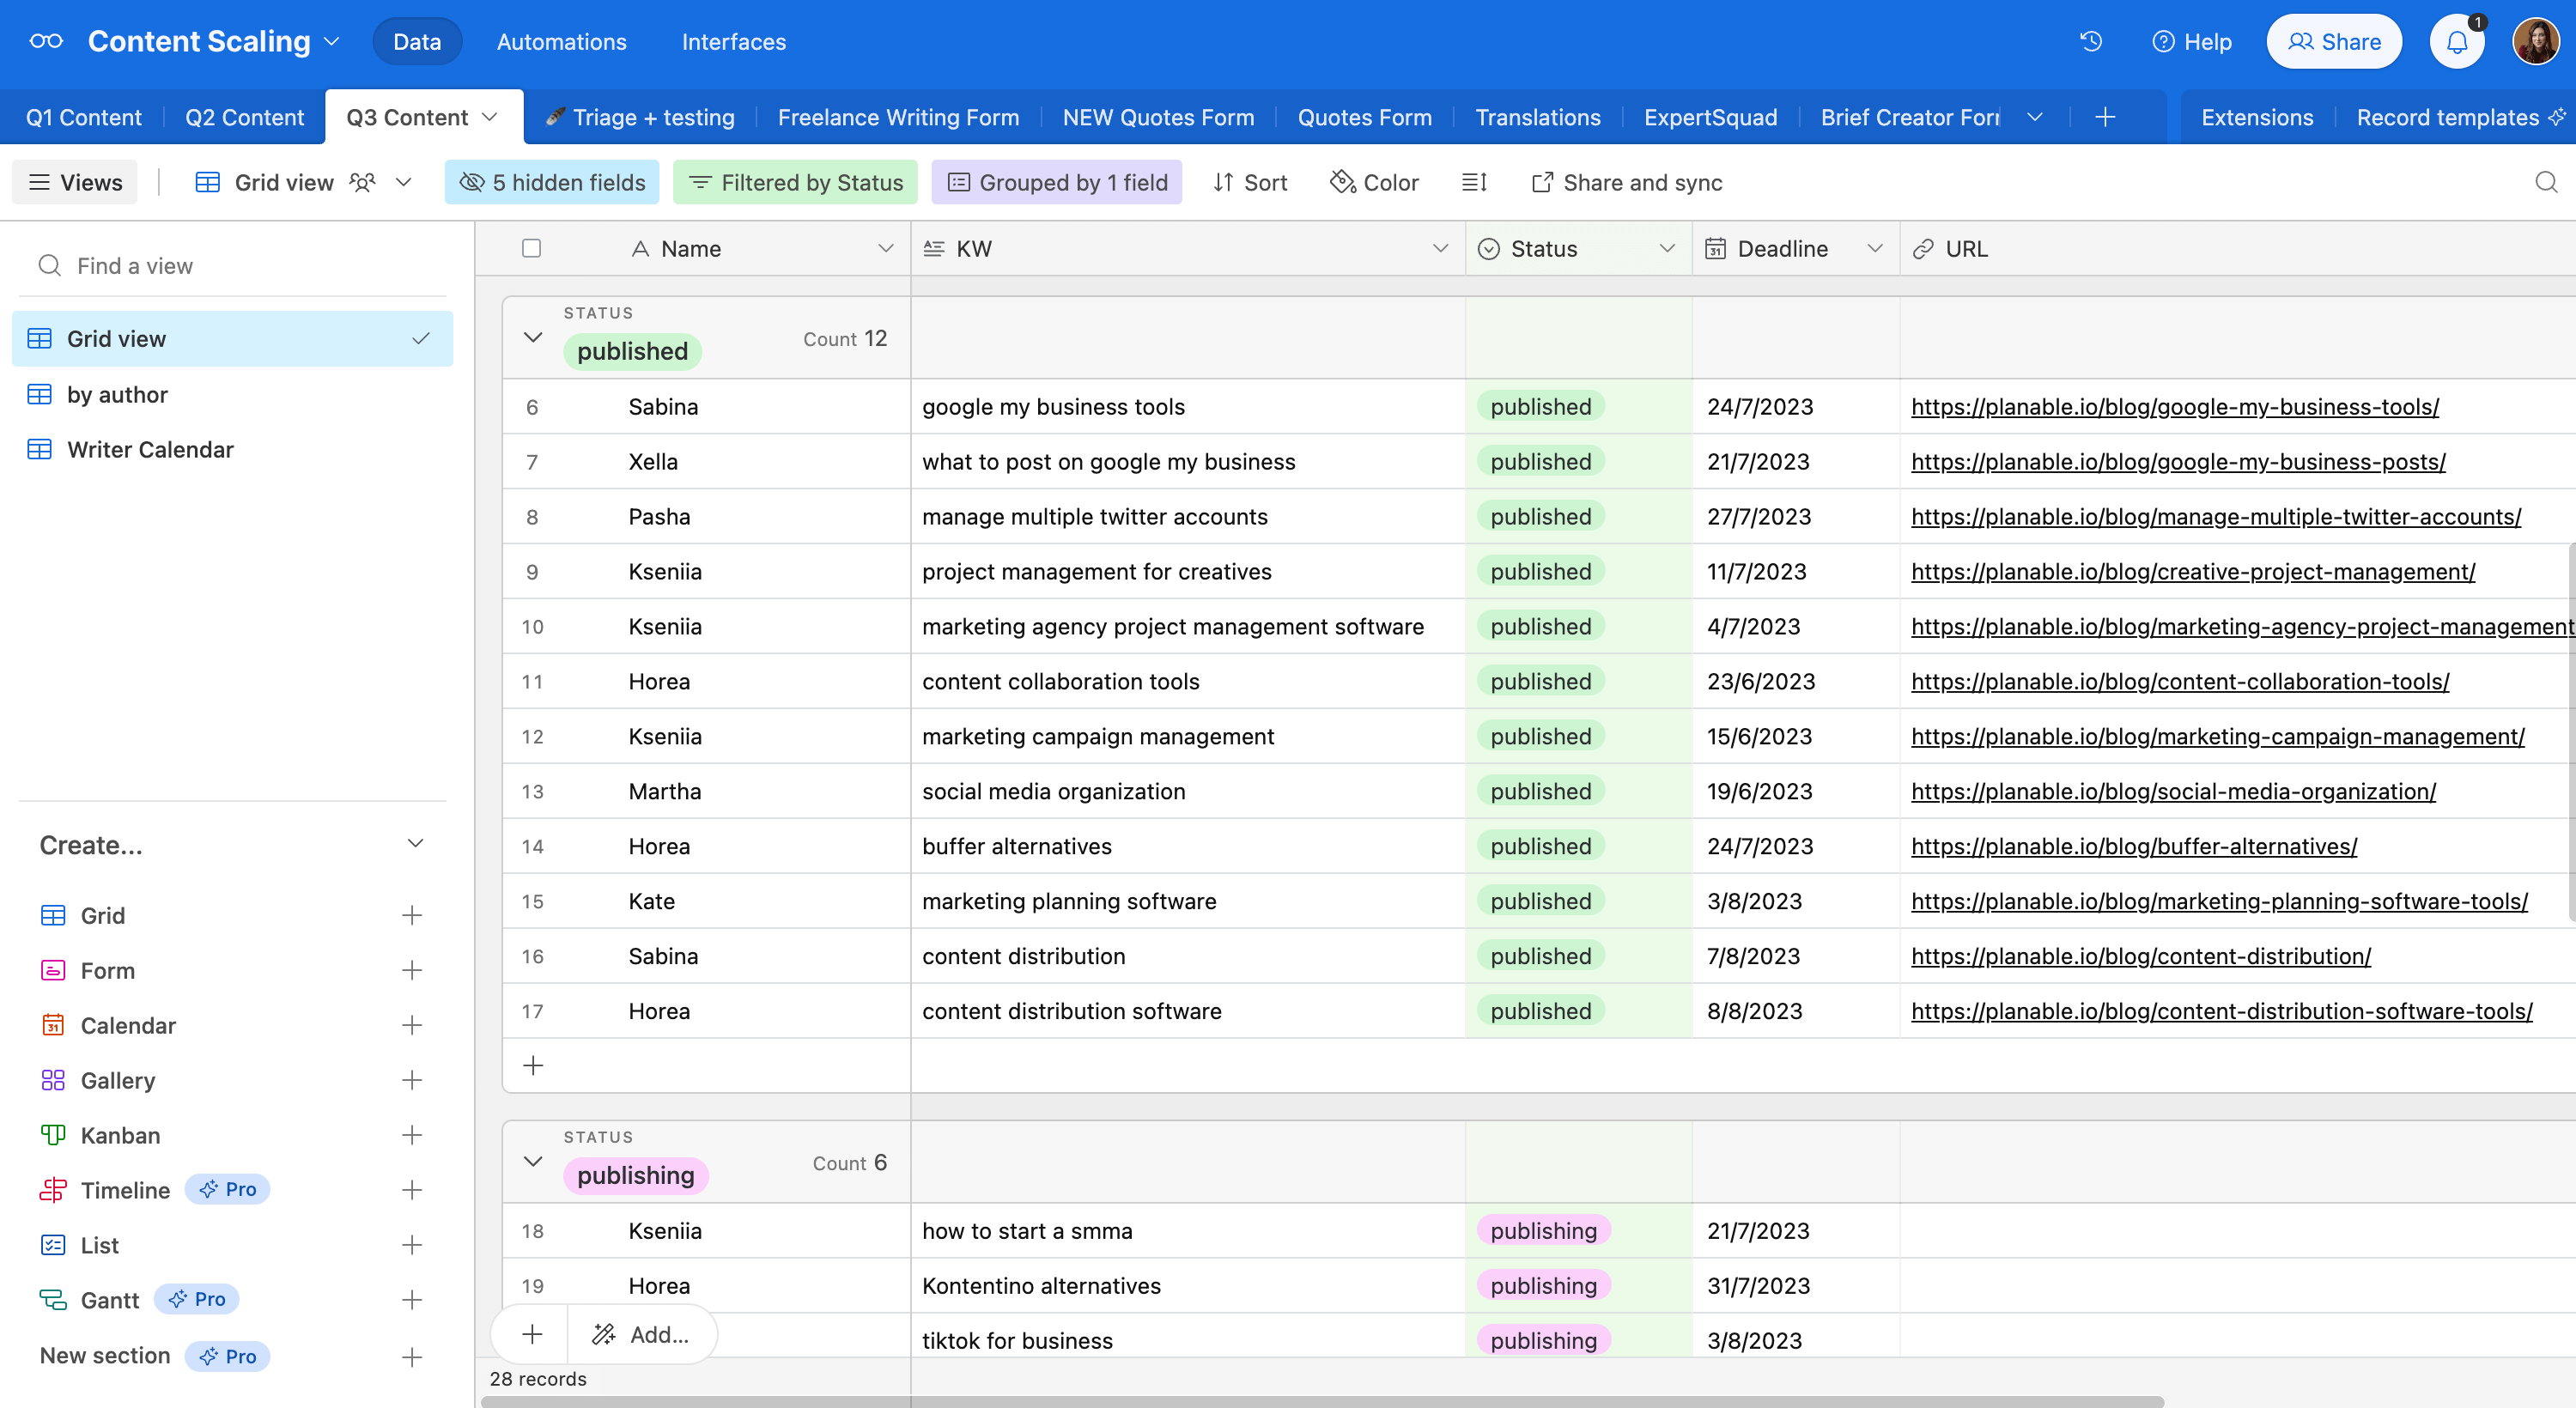 Airtable database for content planning with columns for name, keywords, status, deadline and URL.